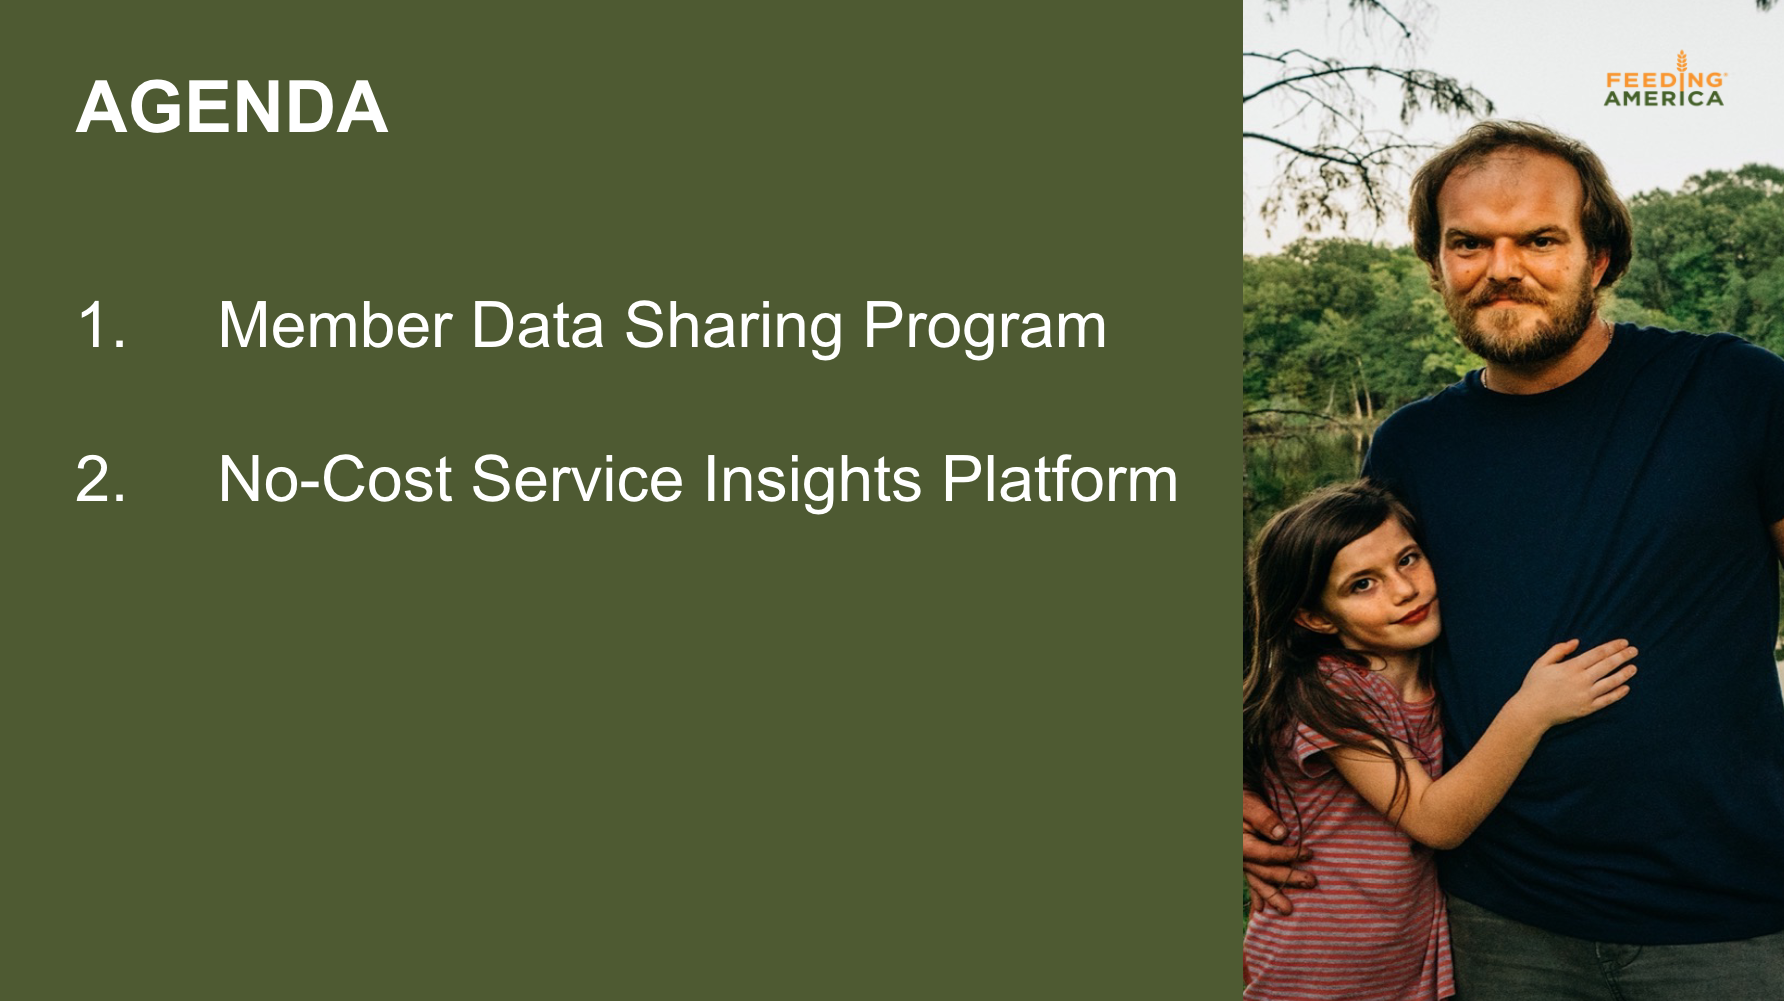 Research & Data: Member Data Sharing and Service Insights Platform